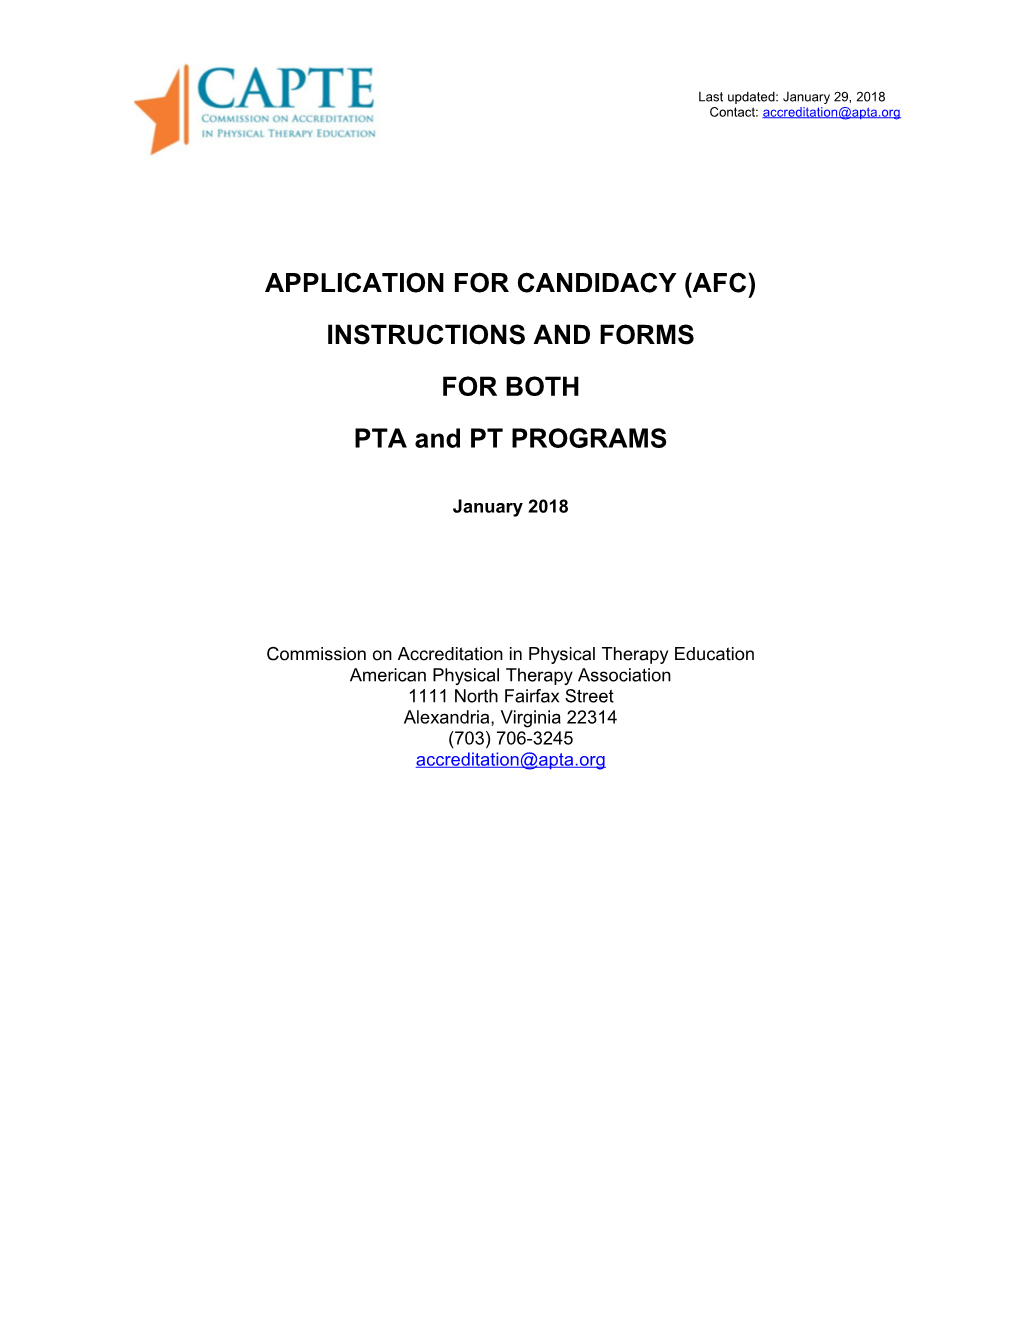 Application for Candidacy (Afc)